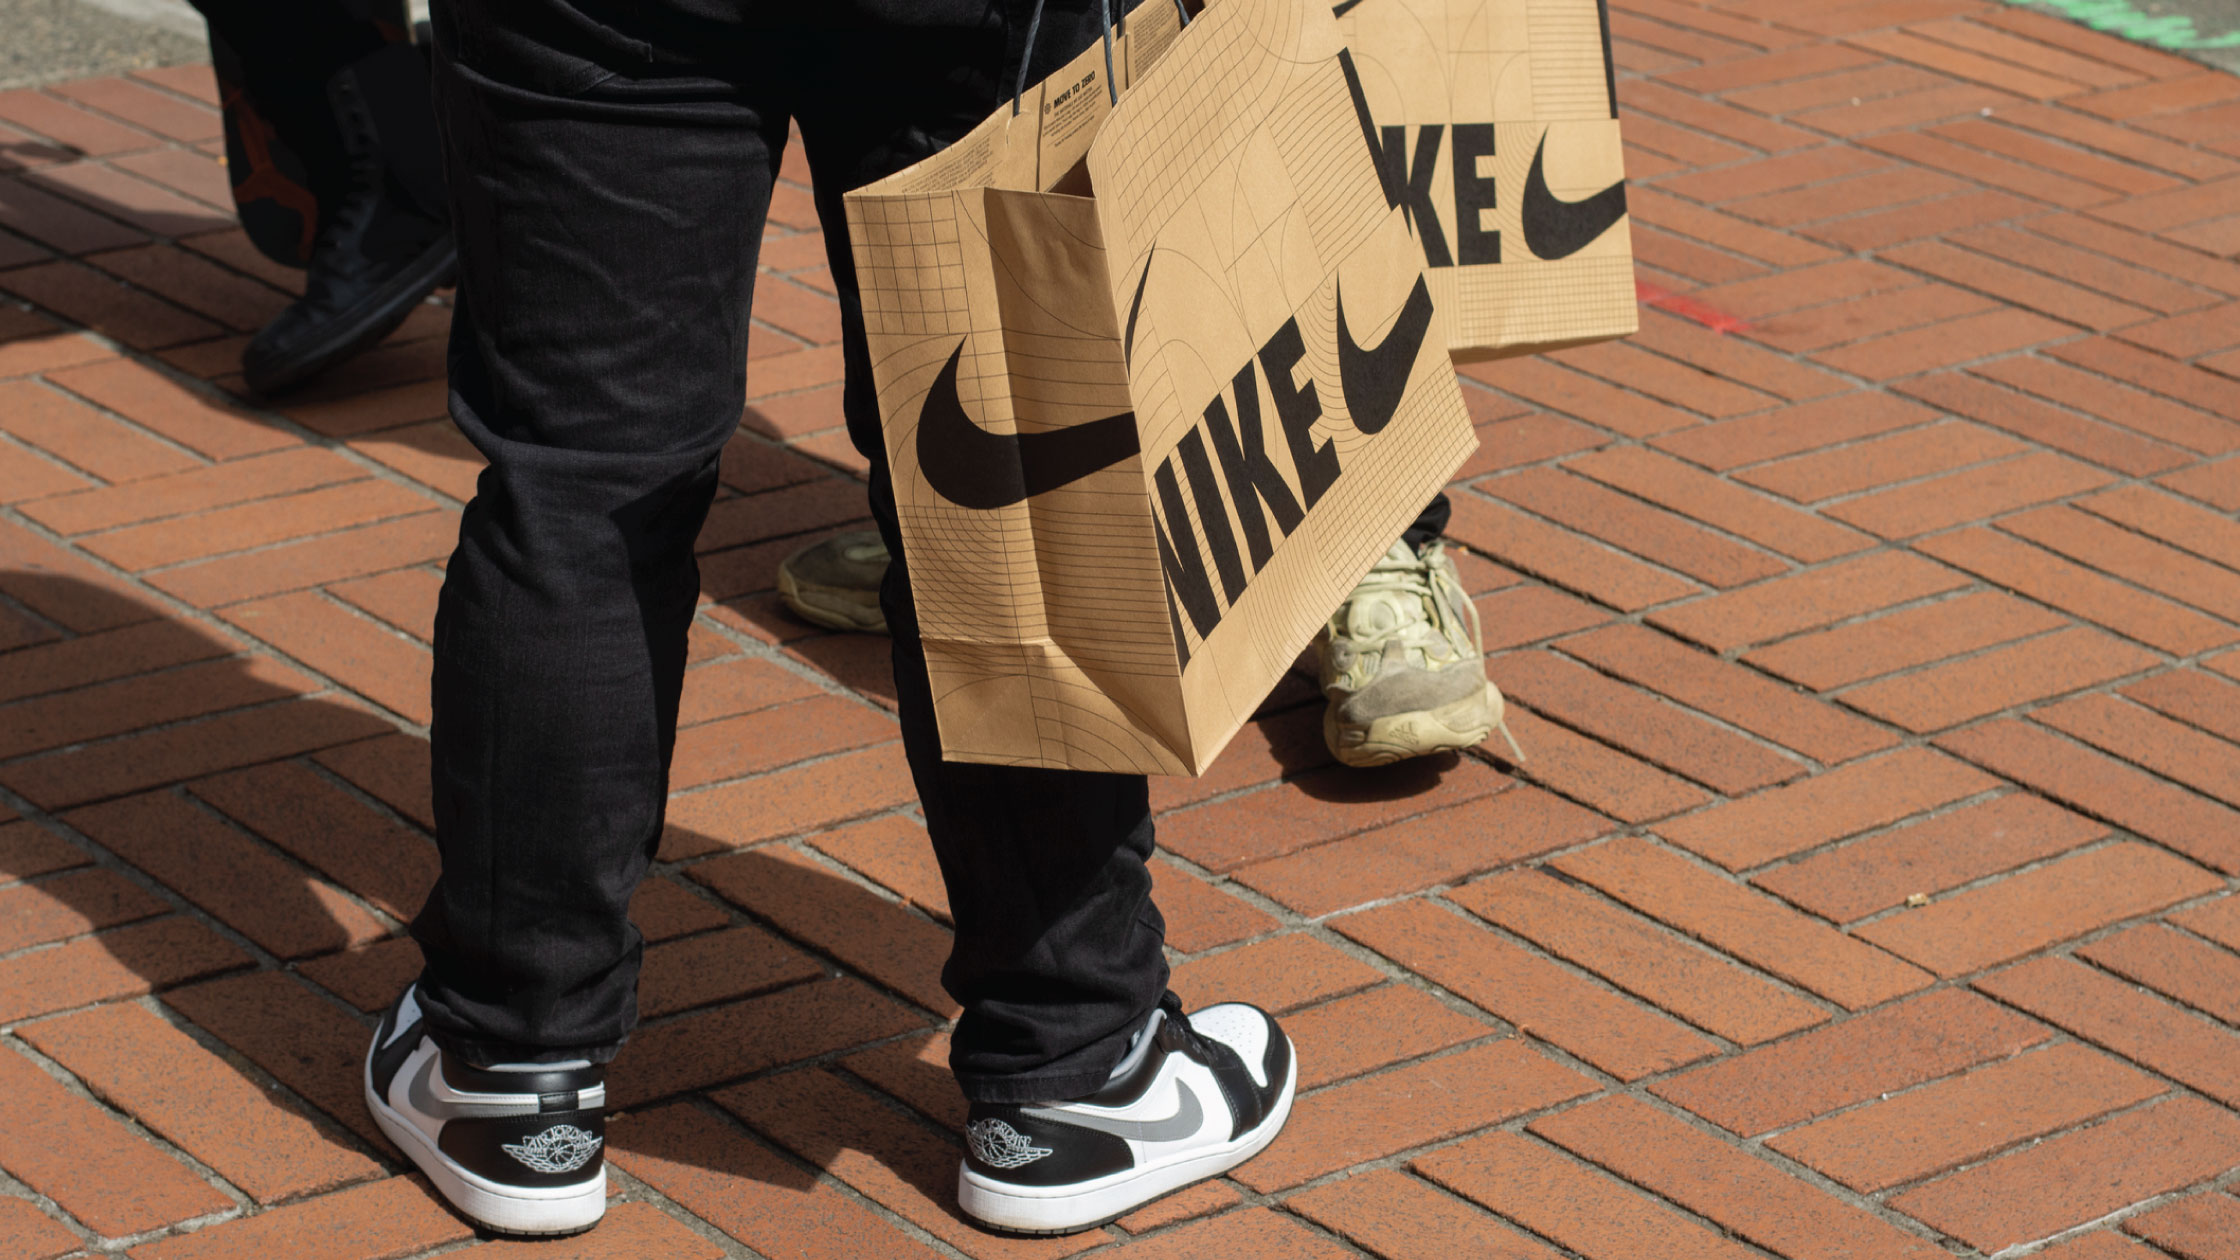 Nike Financial Outlook: Revenue may decline but gross profit margin is expected to increase